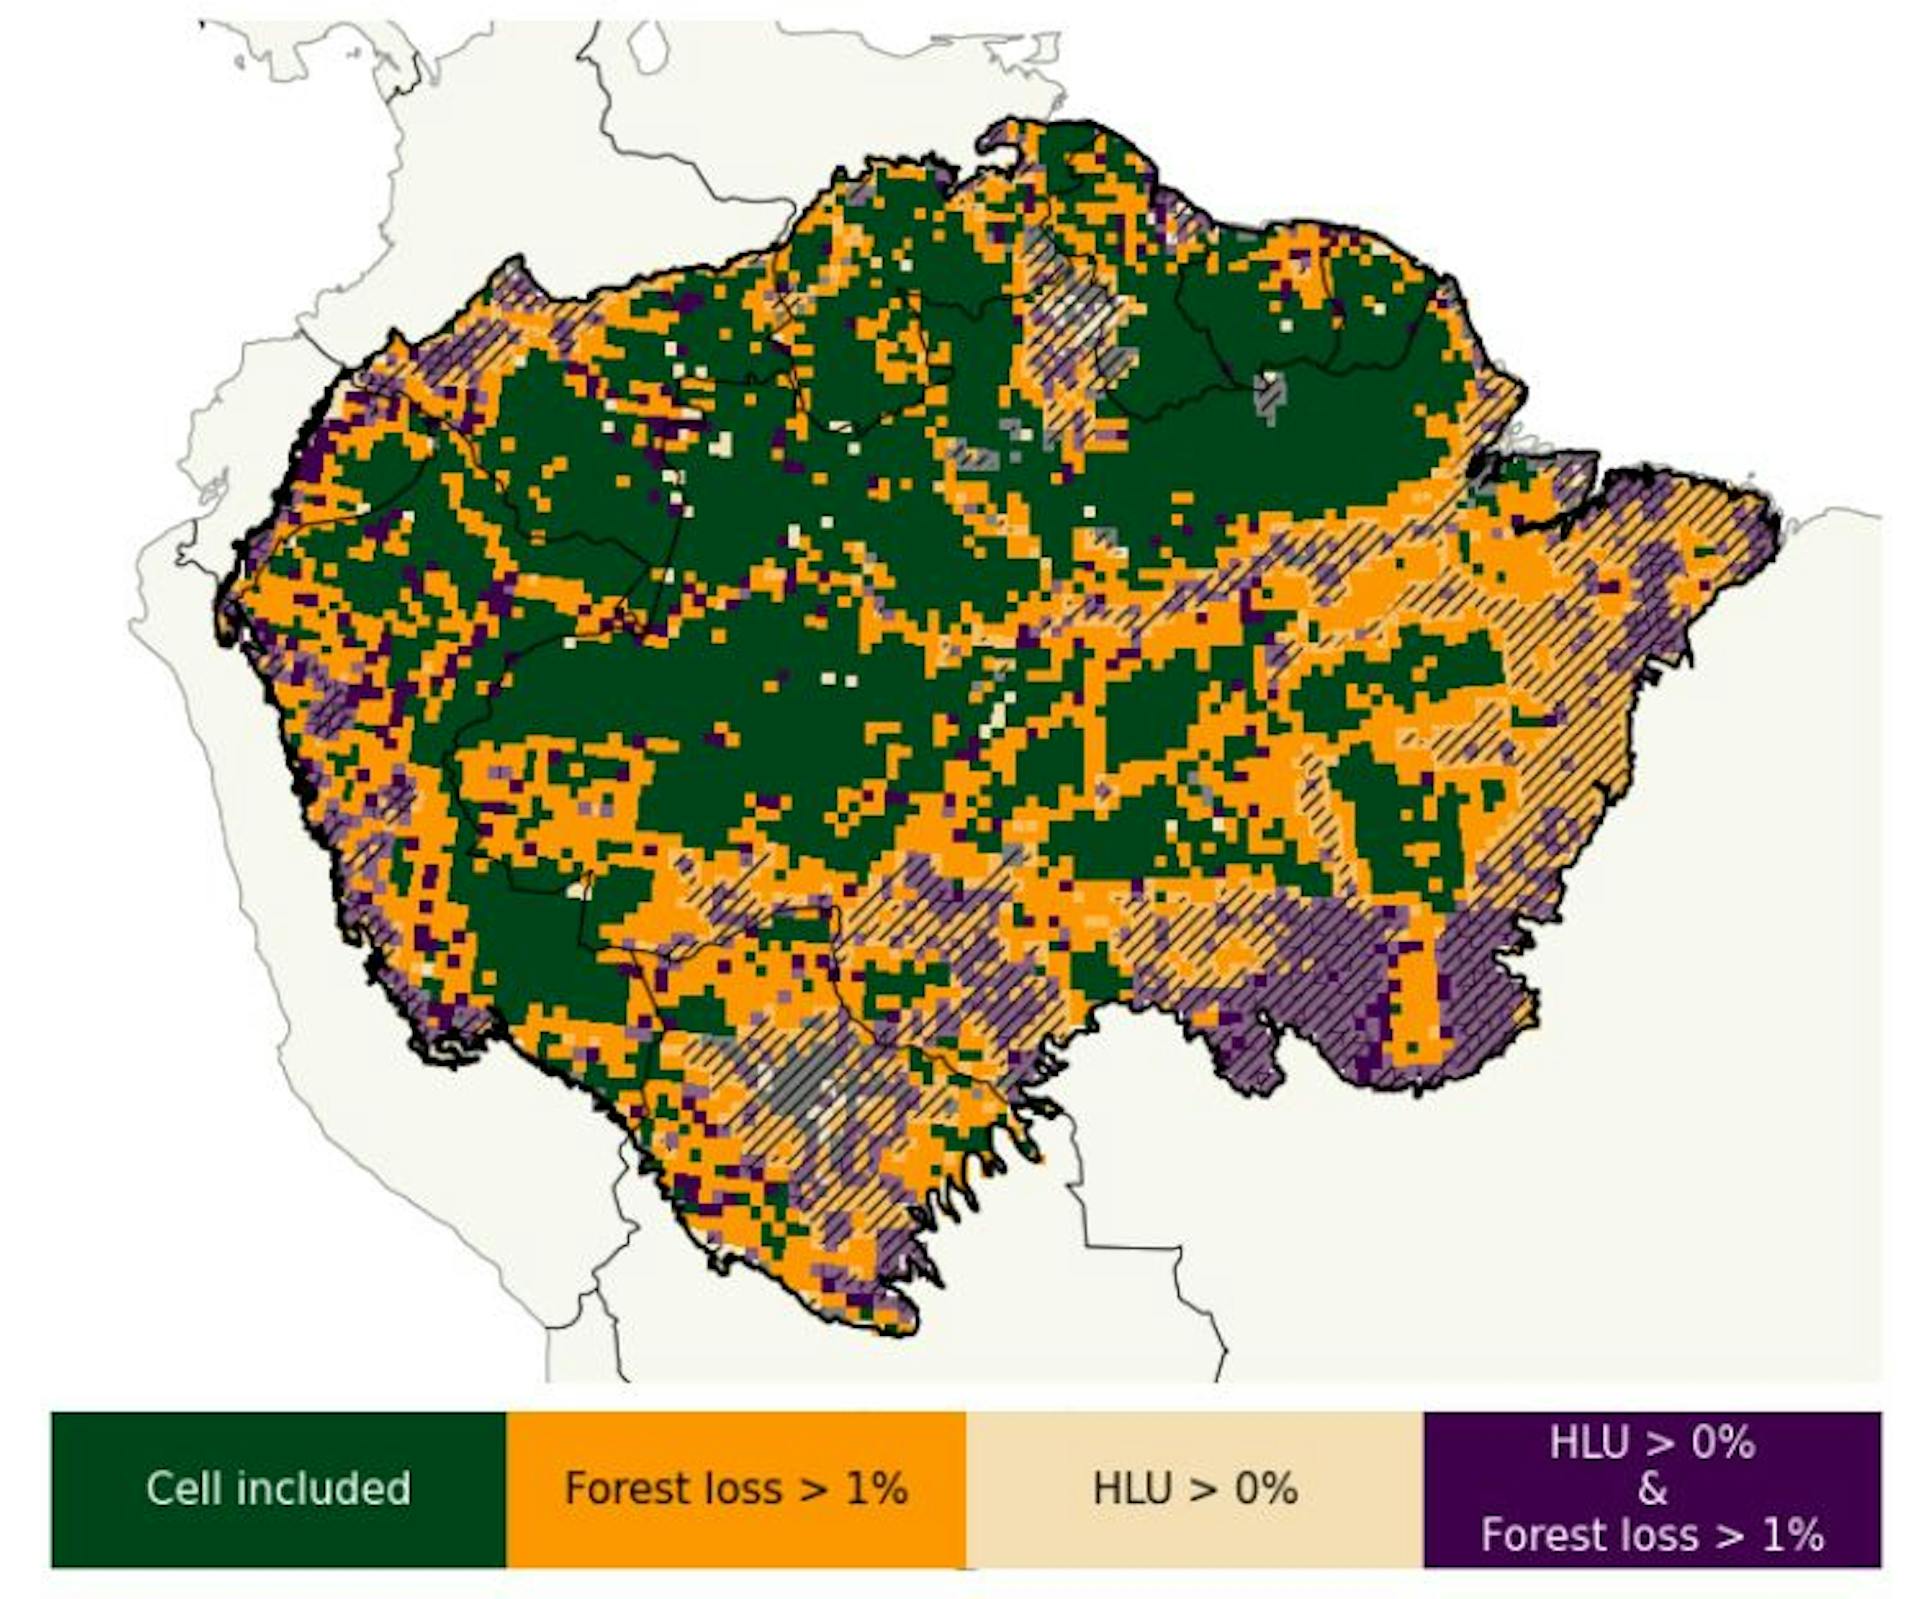 Figure 3: Grid cells included in the analysis. For a grid cell to be included (green), there may not be any remotely sensed Human Land Use (Friedl and Sulla-Menashe, 2015) (HLU, violet) and the forest loss according to Hansen et al. (2013) (orange) may not cumulate to more than 1 % of the cell’s area over the years 2001 to 2020. Furthermore, the Evergreen Broadleaf Fraction (EBlF, hatched) may not be less than 80 % in any of the years, assuring that only dense rainforest is considered.